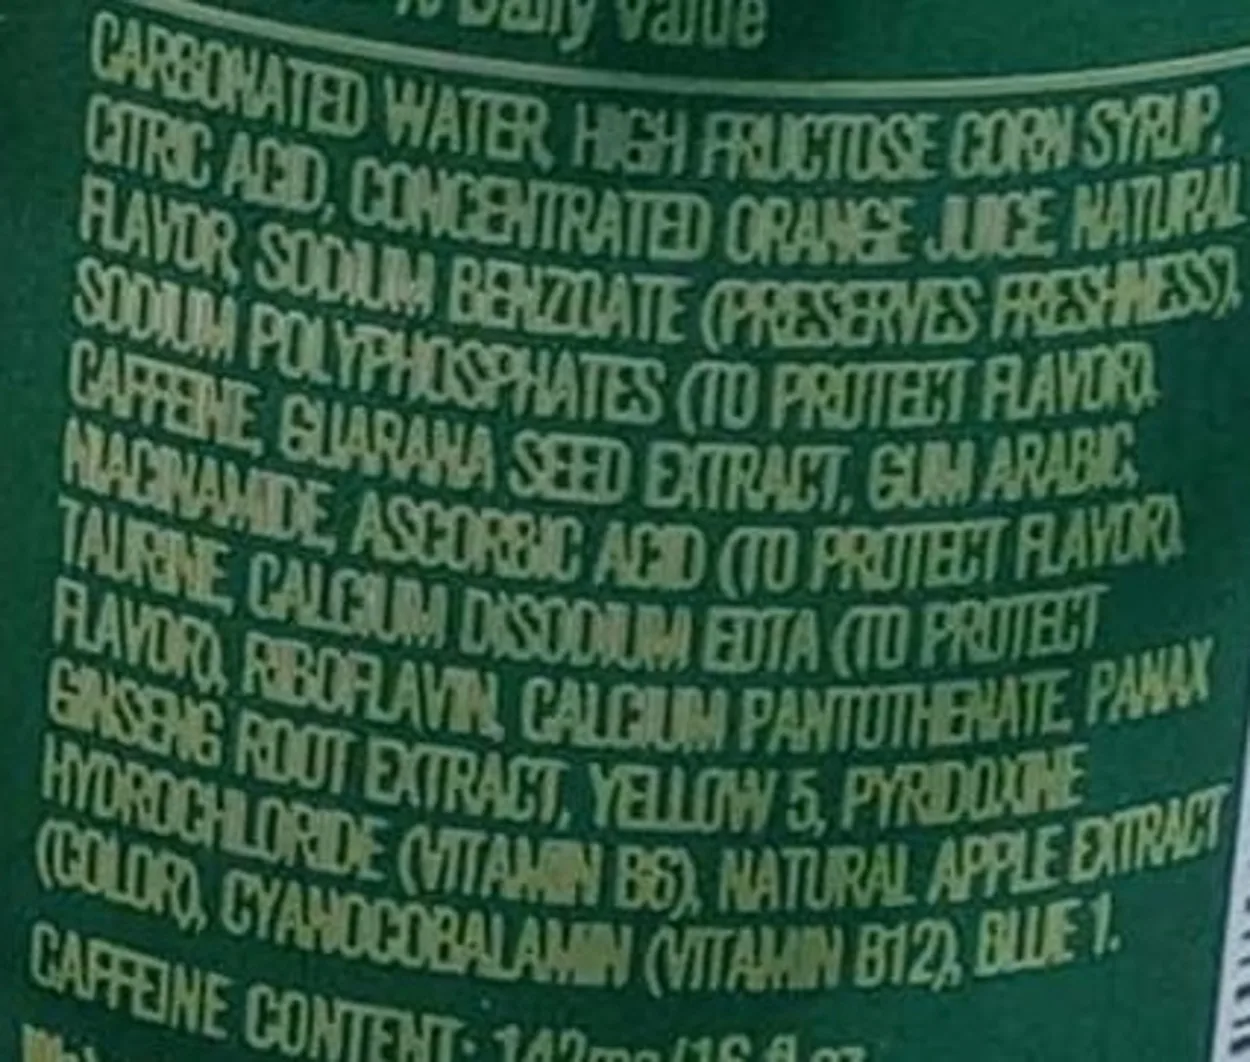 Ingredients of AMP energy at the back of the can